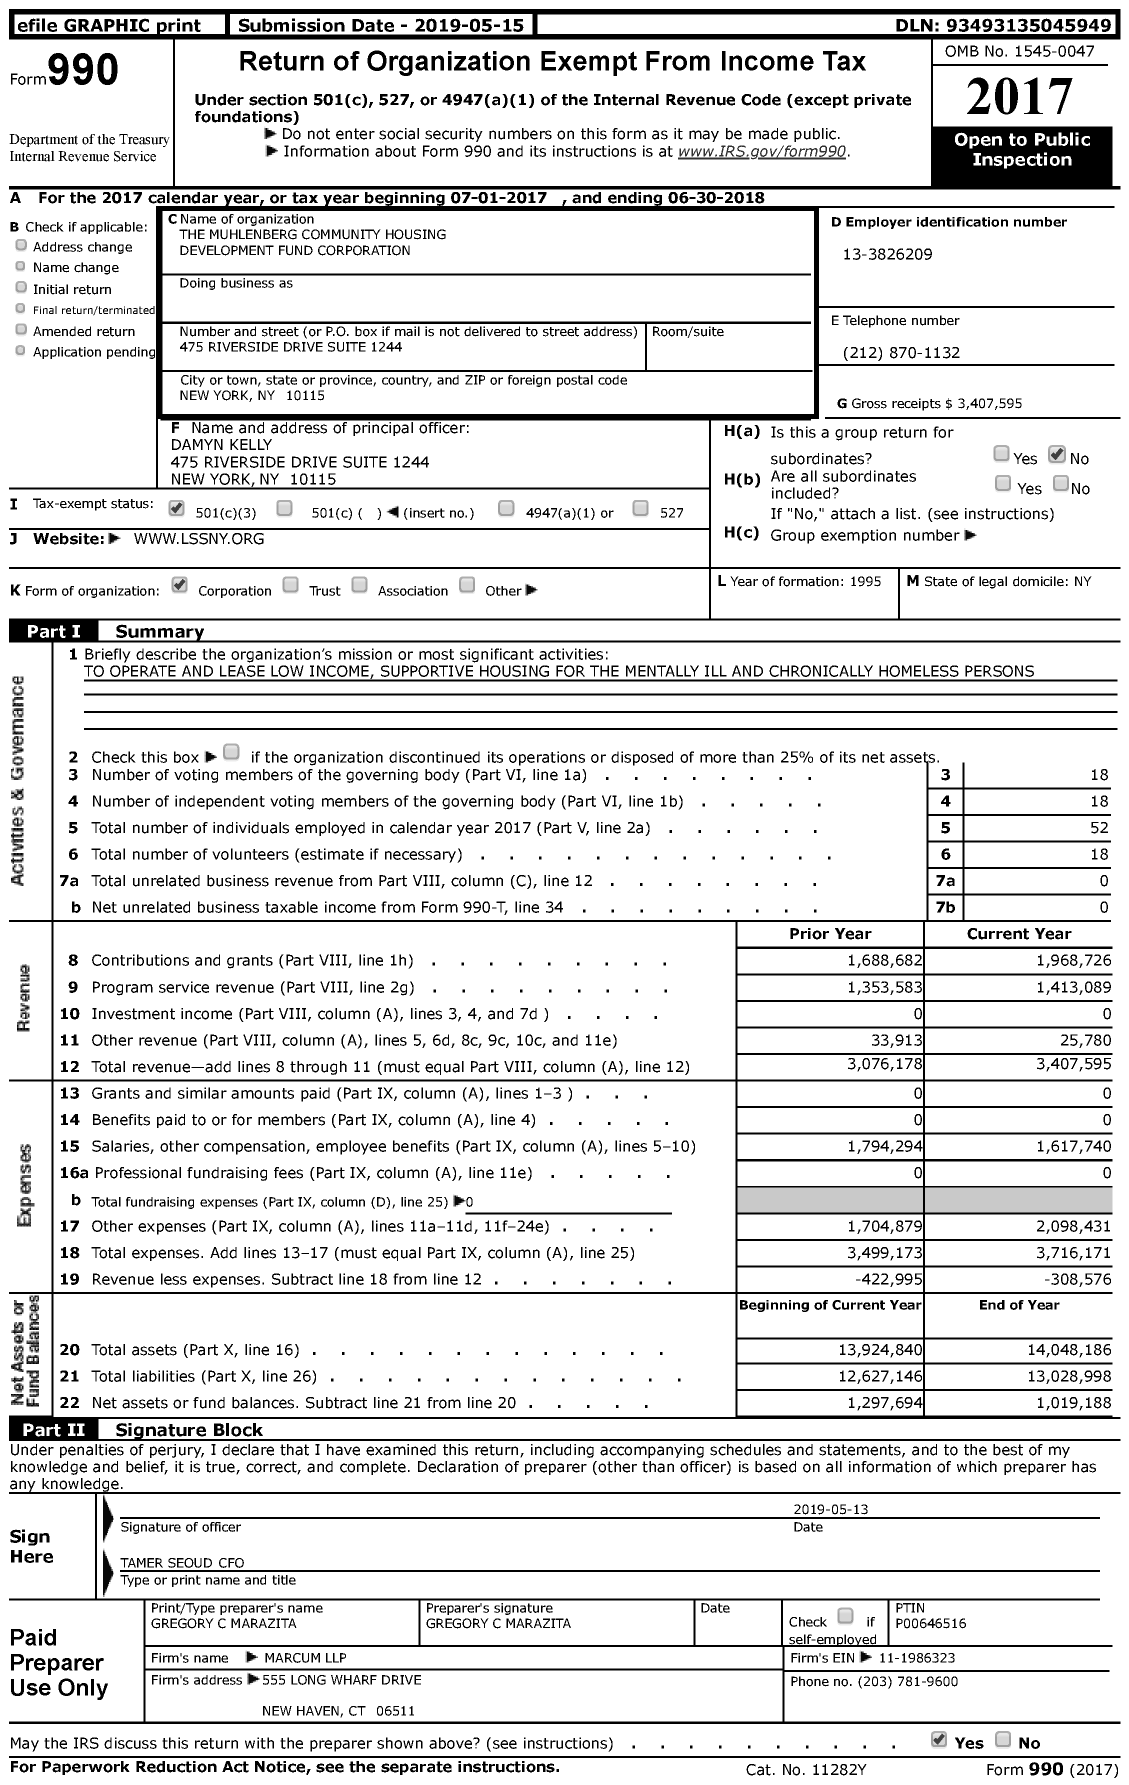 Image of first page of 2017 Form 990 for Muhlenberg Community Housing Development Fund Corporation